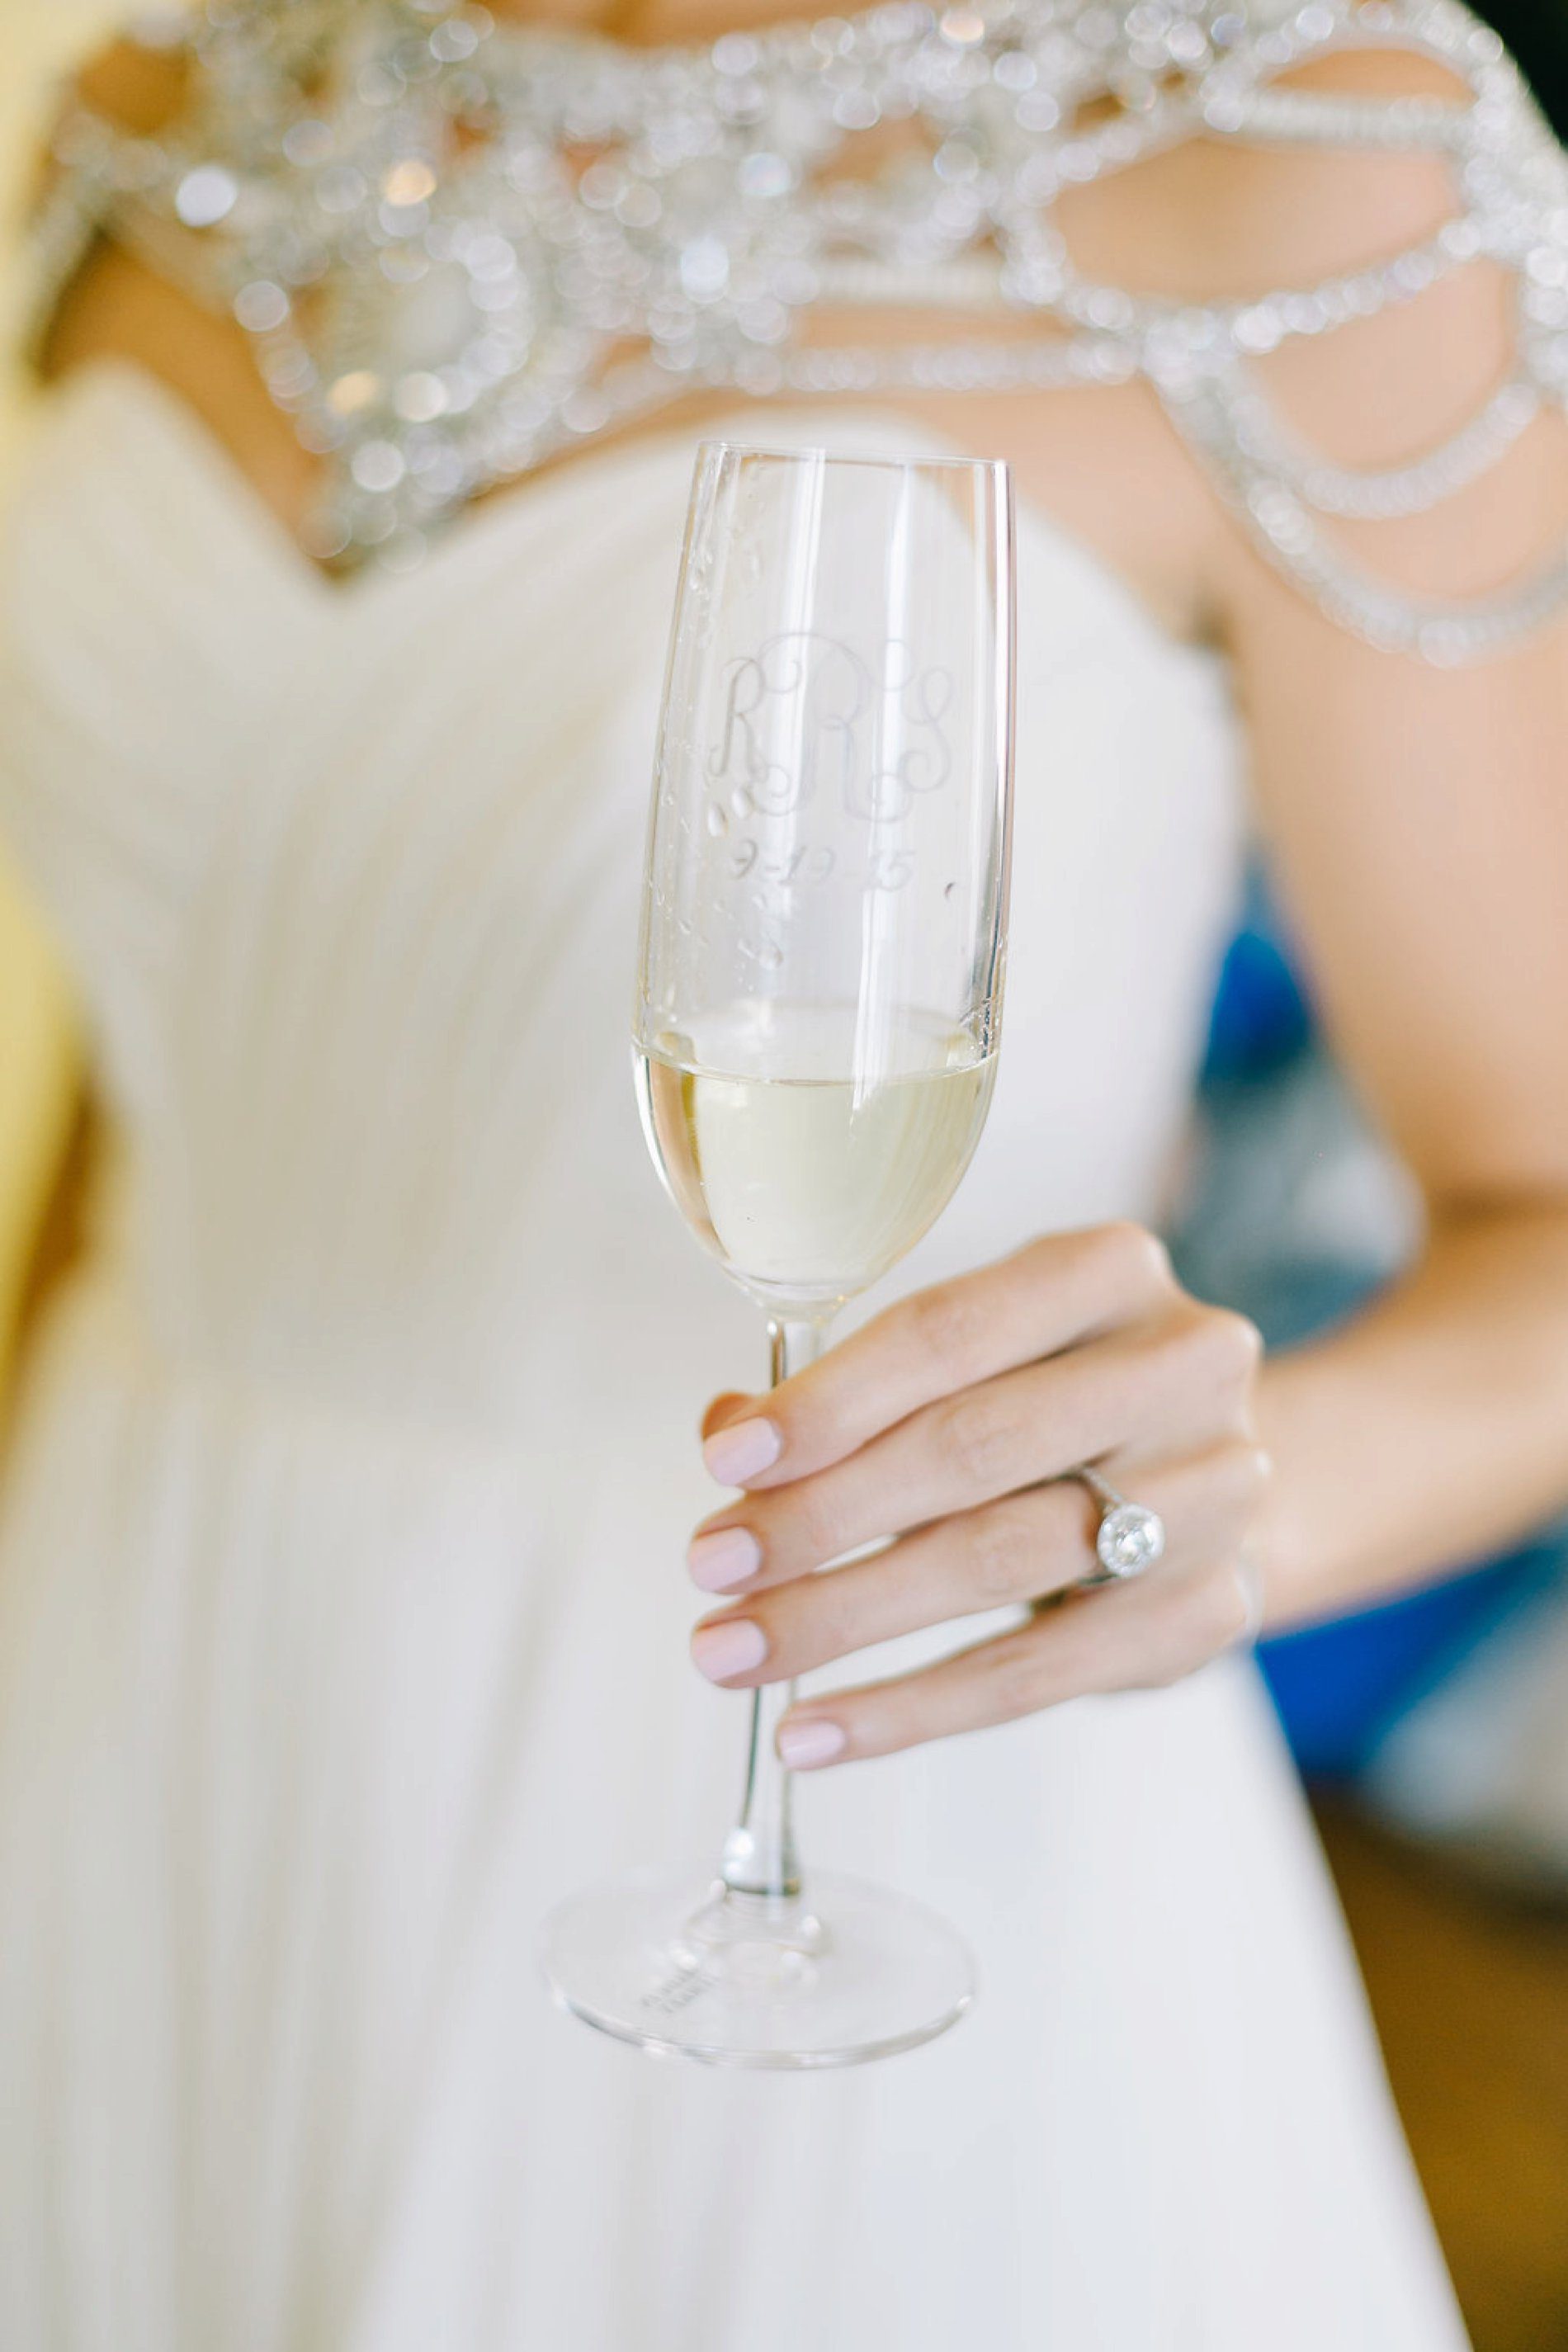 Customized monogrammed champagne glass with wedding date